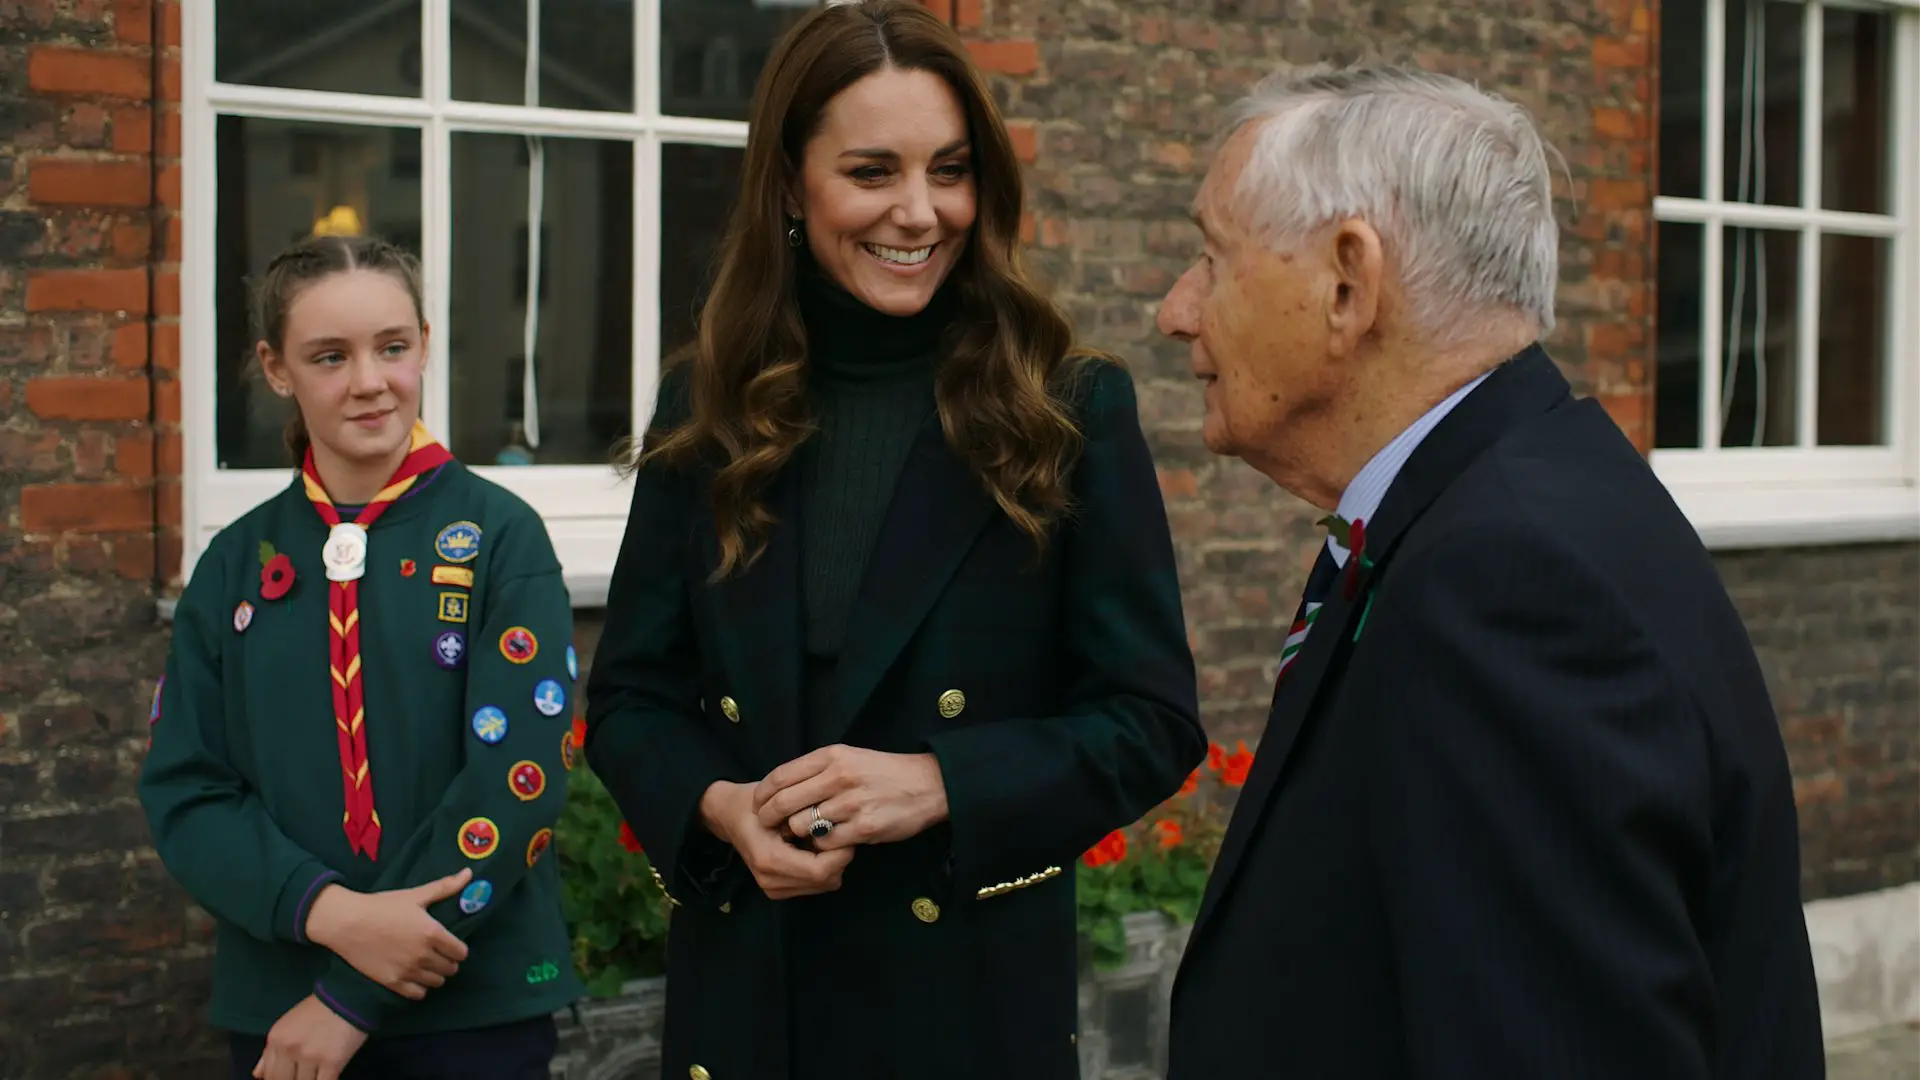 The Duchess of Cambridge met with Italian Veteran ahead of Remembrance Sunday